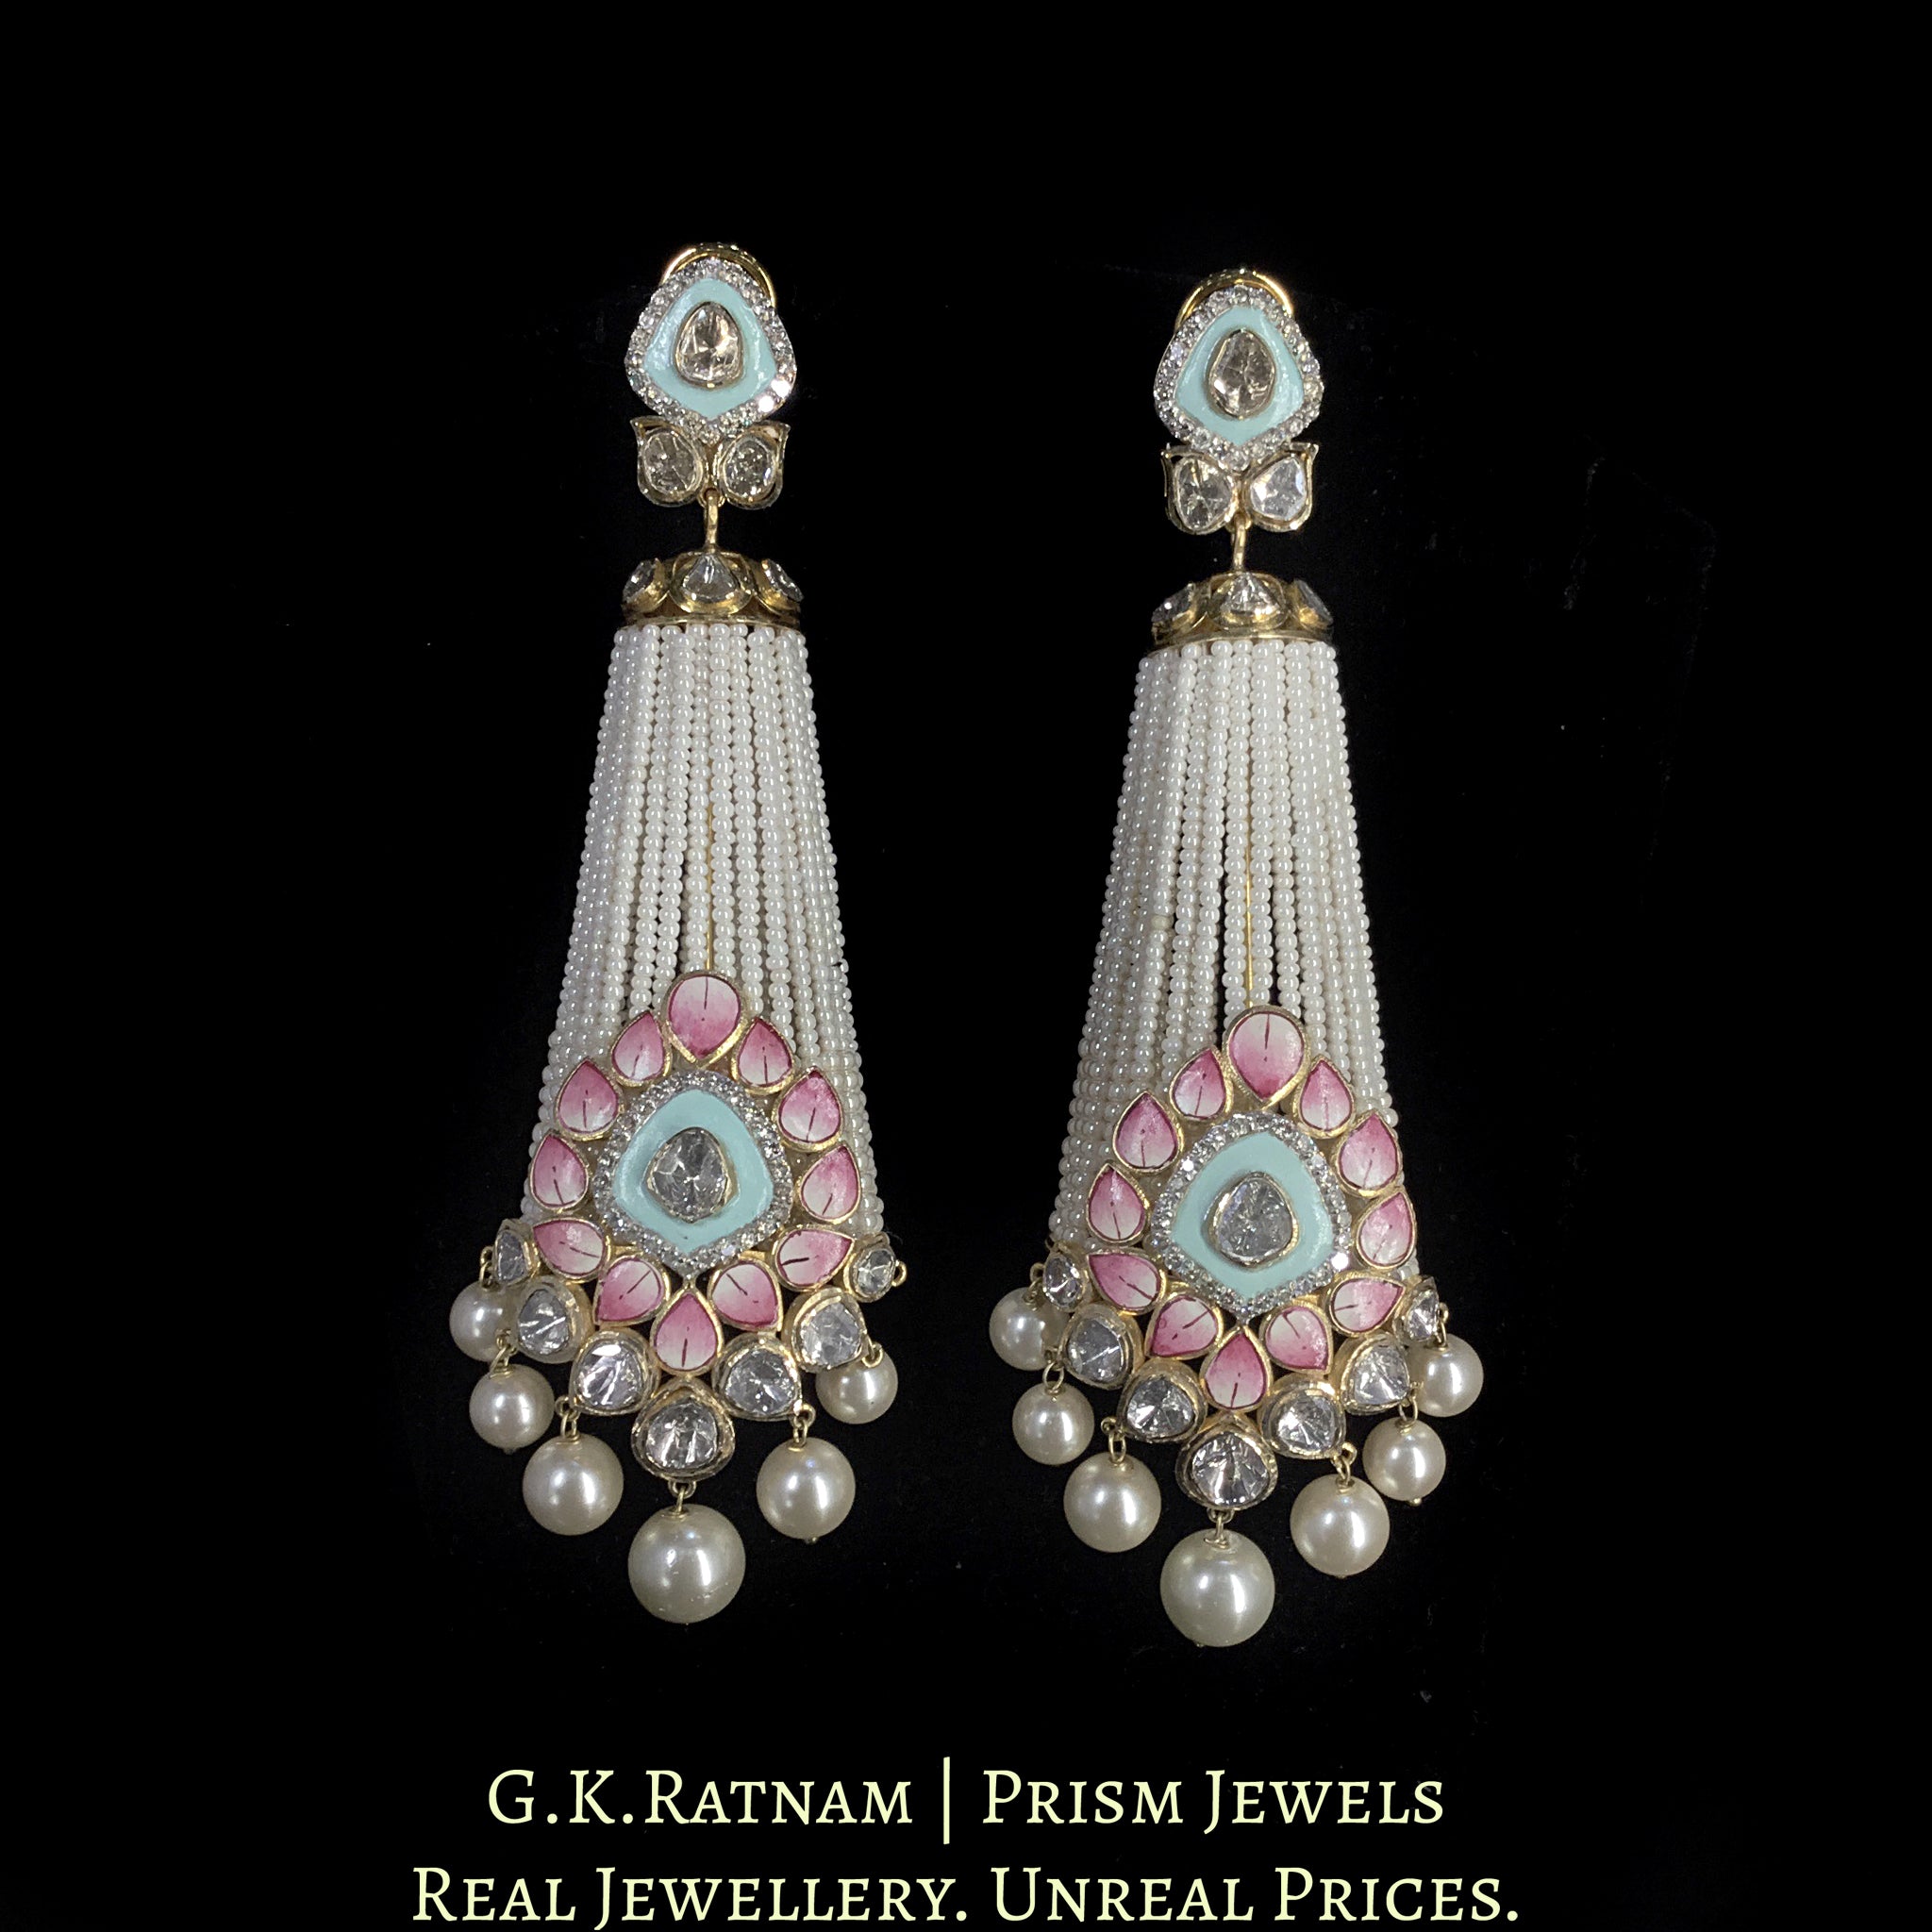 18k Gold and Diamond Polki Open Setting Long Jhumki Earring Pair With Pastel Meenakari and Chid Pearls